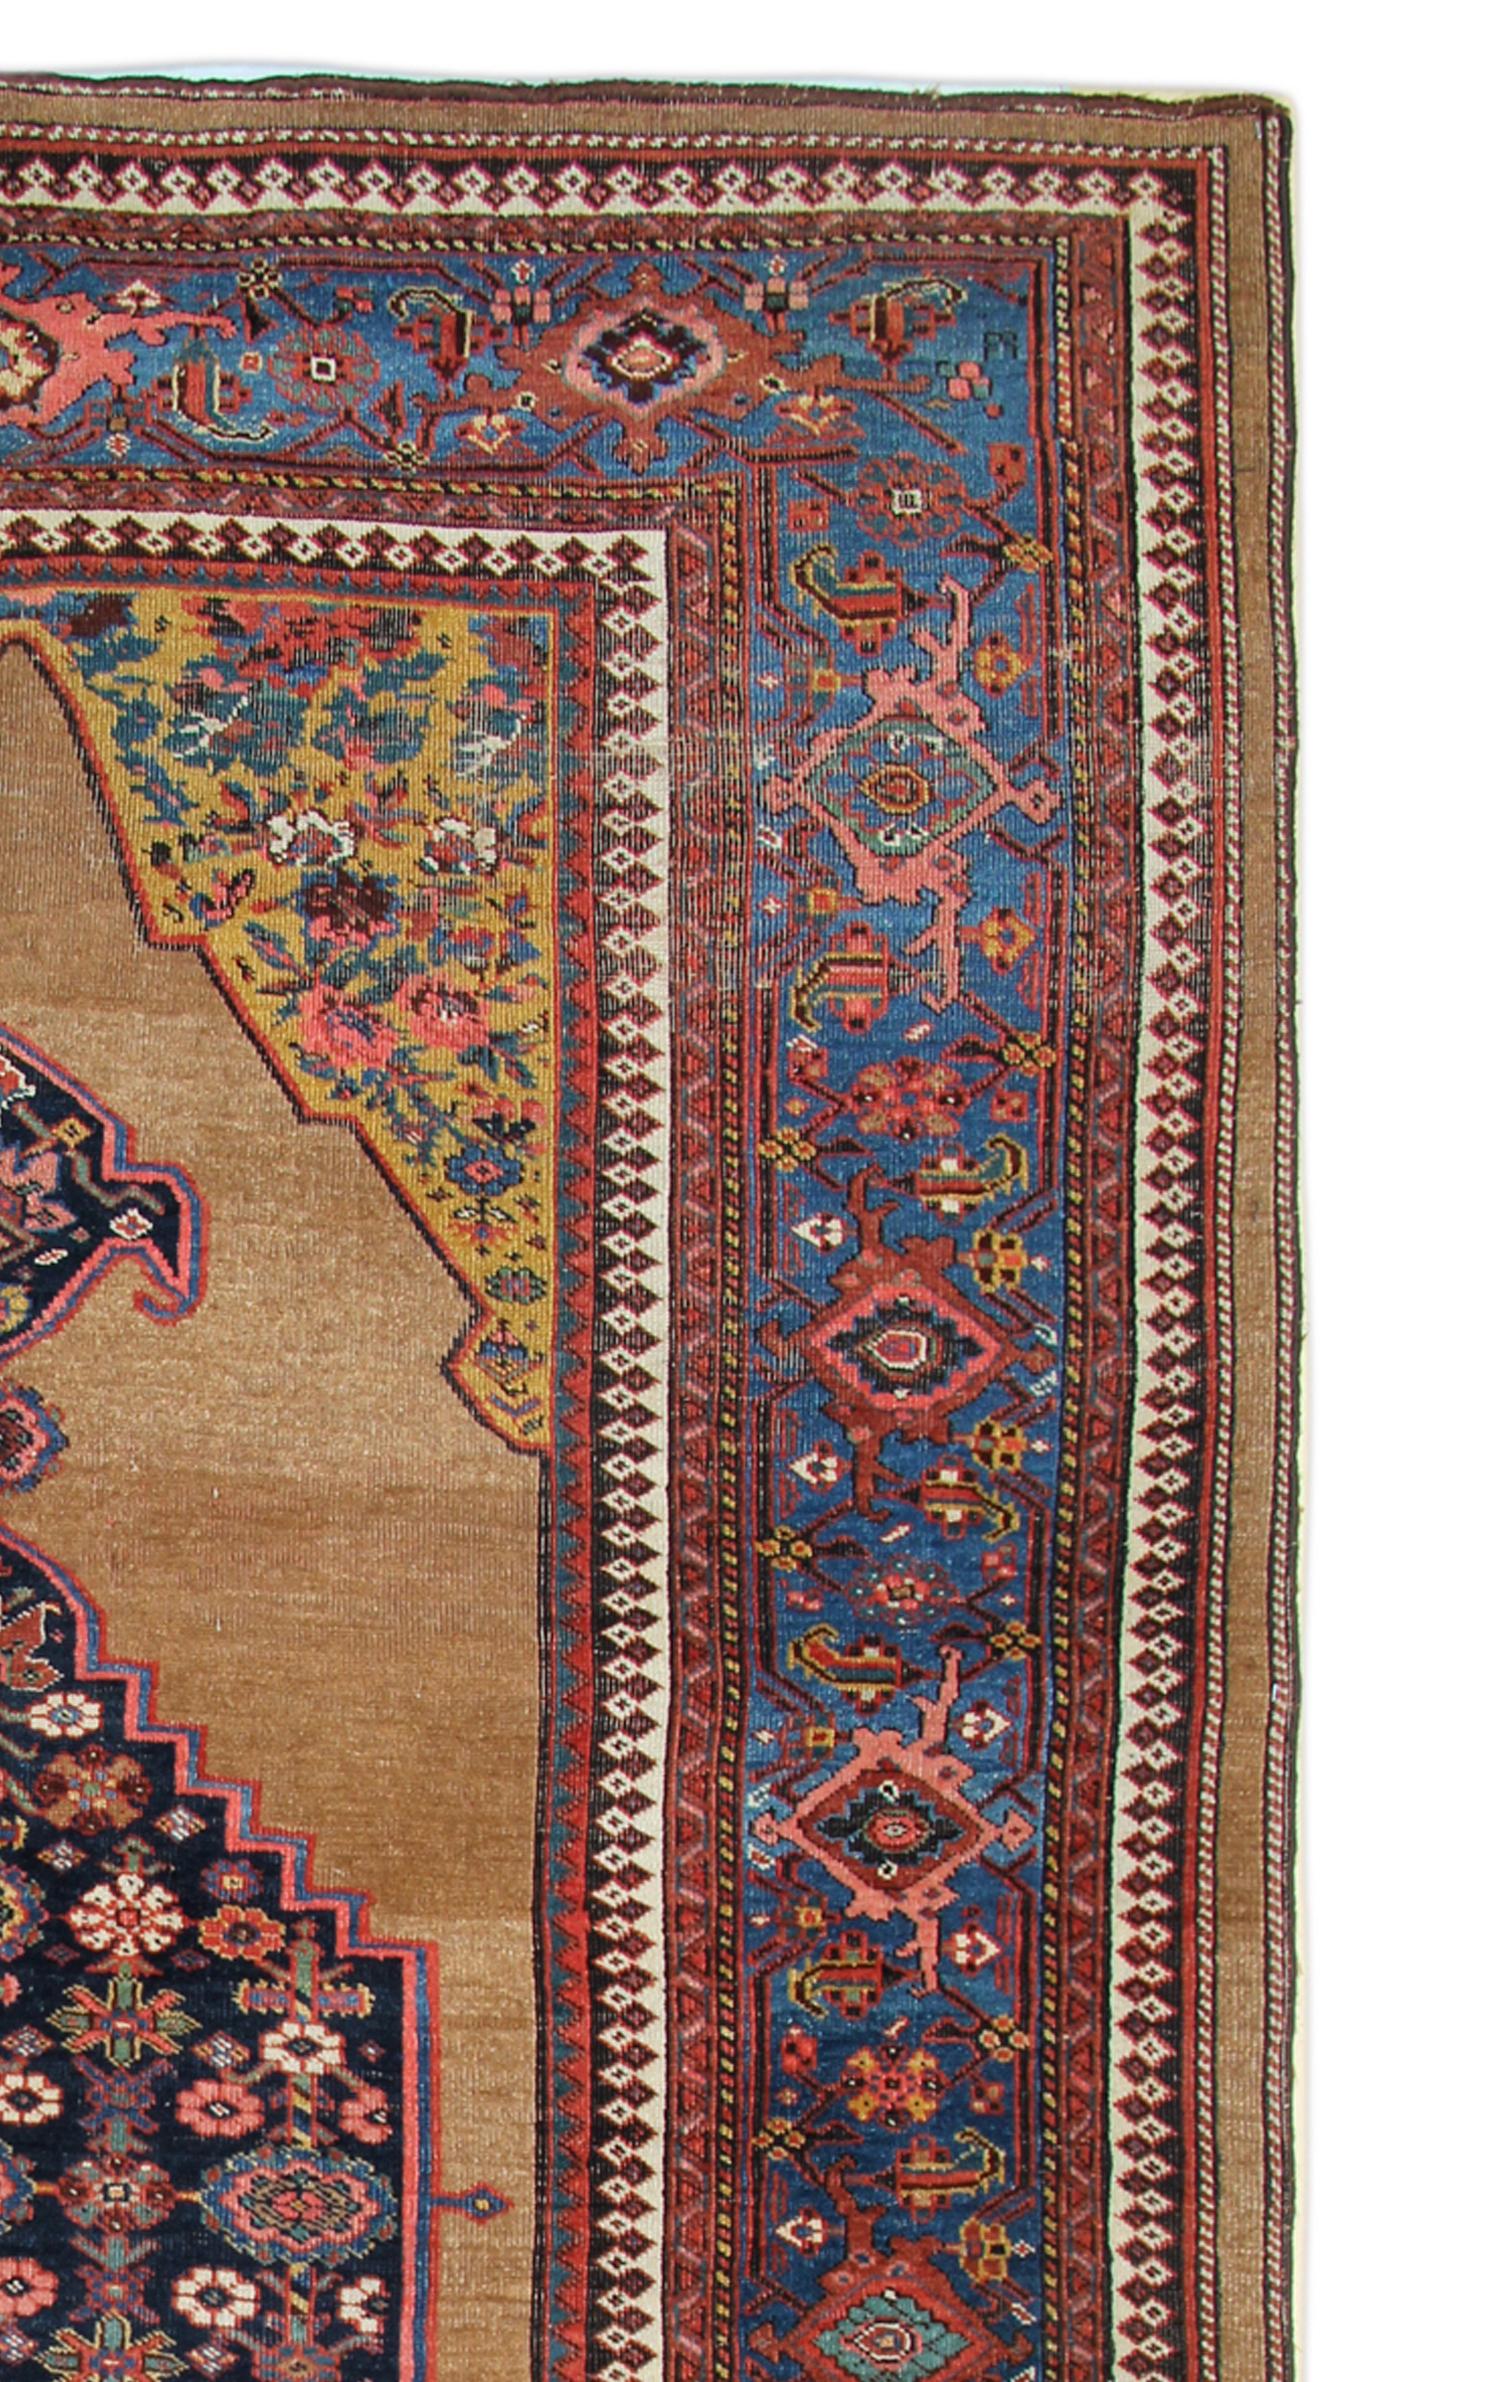 This beautiful Antique Persian rug was handwoven in Iran with hand-spun wool which has been dyed using organic vegetable dyes. Traditional weaving techniques were used by master weavers to create this stunning one of a kind rug Circa 1880. Featuring